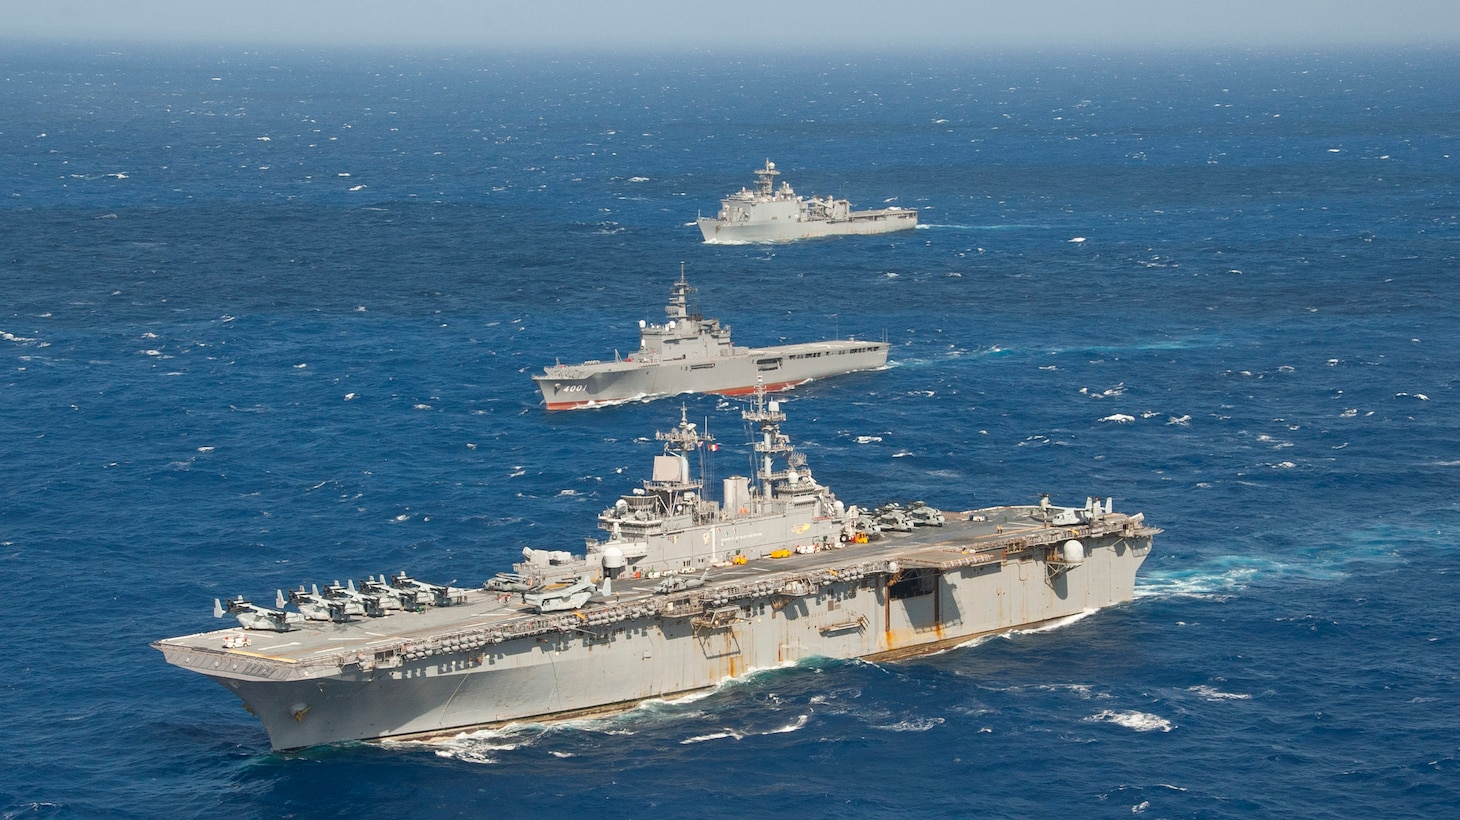 The amphibious assault ship USS Wasp (LHD 1) and dock landing ship USS Ashland (LSD 48), both a part of the Wasp Amphibious Ready Group (ARG), sail alongside the Japan Maritime Self Defense Force (JMSDF) amphibious transport dock ship JS Osumi (LST 4001) during a Passing Exercise (PASSEX) in the Philippine Sea Aug. 26, 2018. PASSEX enabled the Wasp ARG and the JMSDF a chance to practice communications and maneuvering procedures. The Wasp ARG is currently operating in the region to enhance interoperability with partners and serve as a ready-response force for any type of contingency.